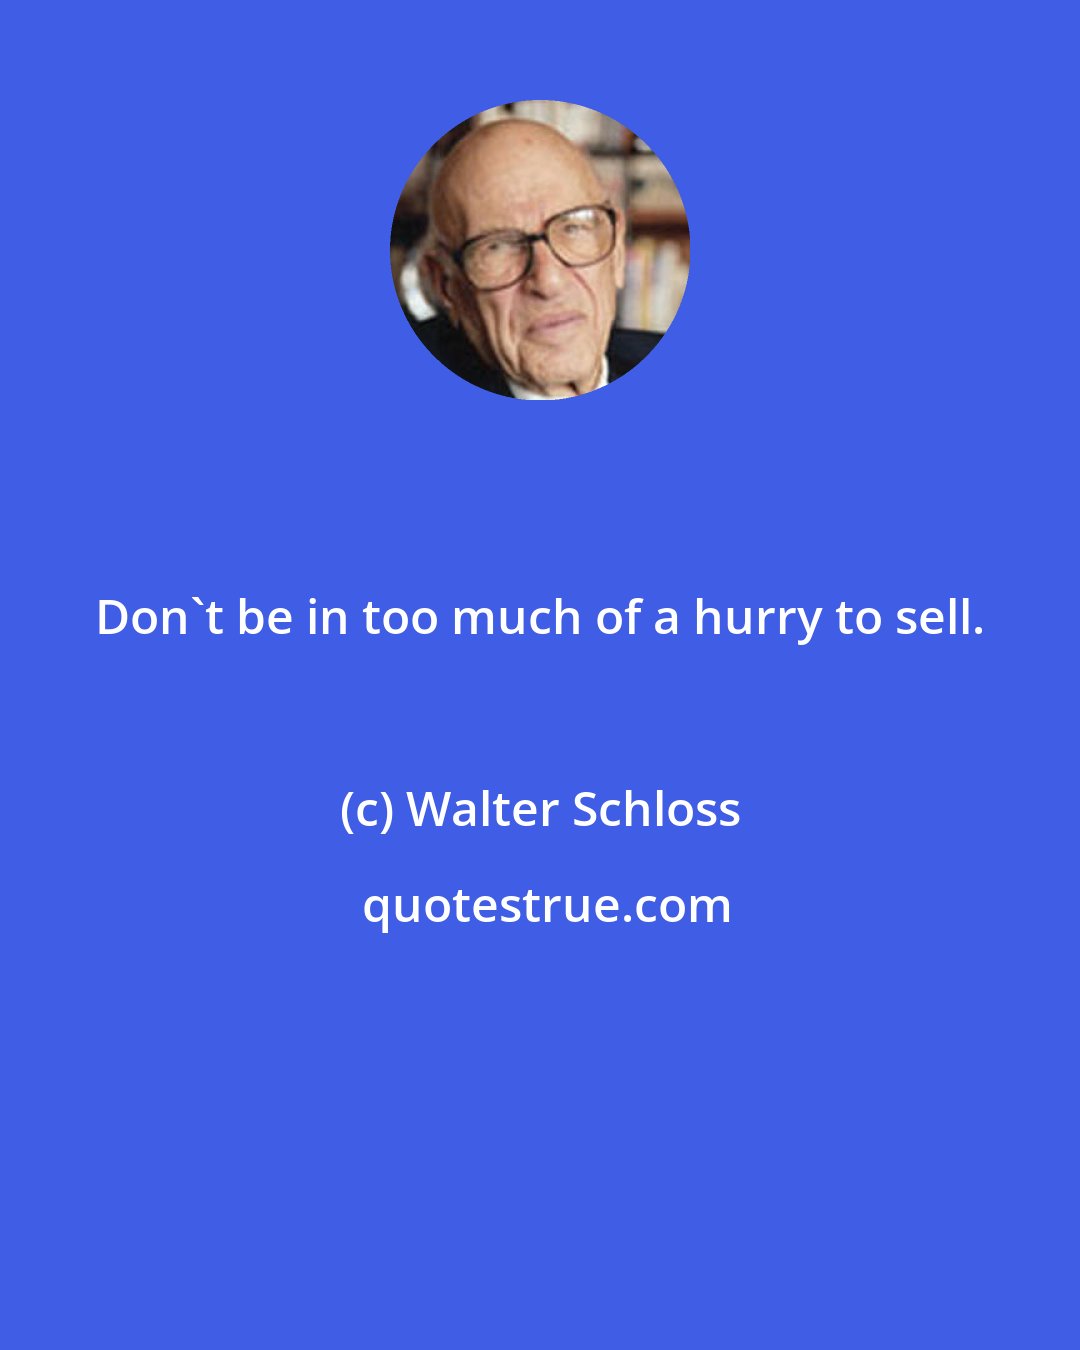 Walter Schloss: Don't be in too much of a hurry to sell.